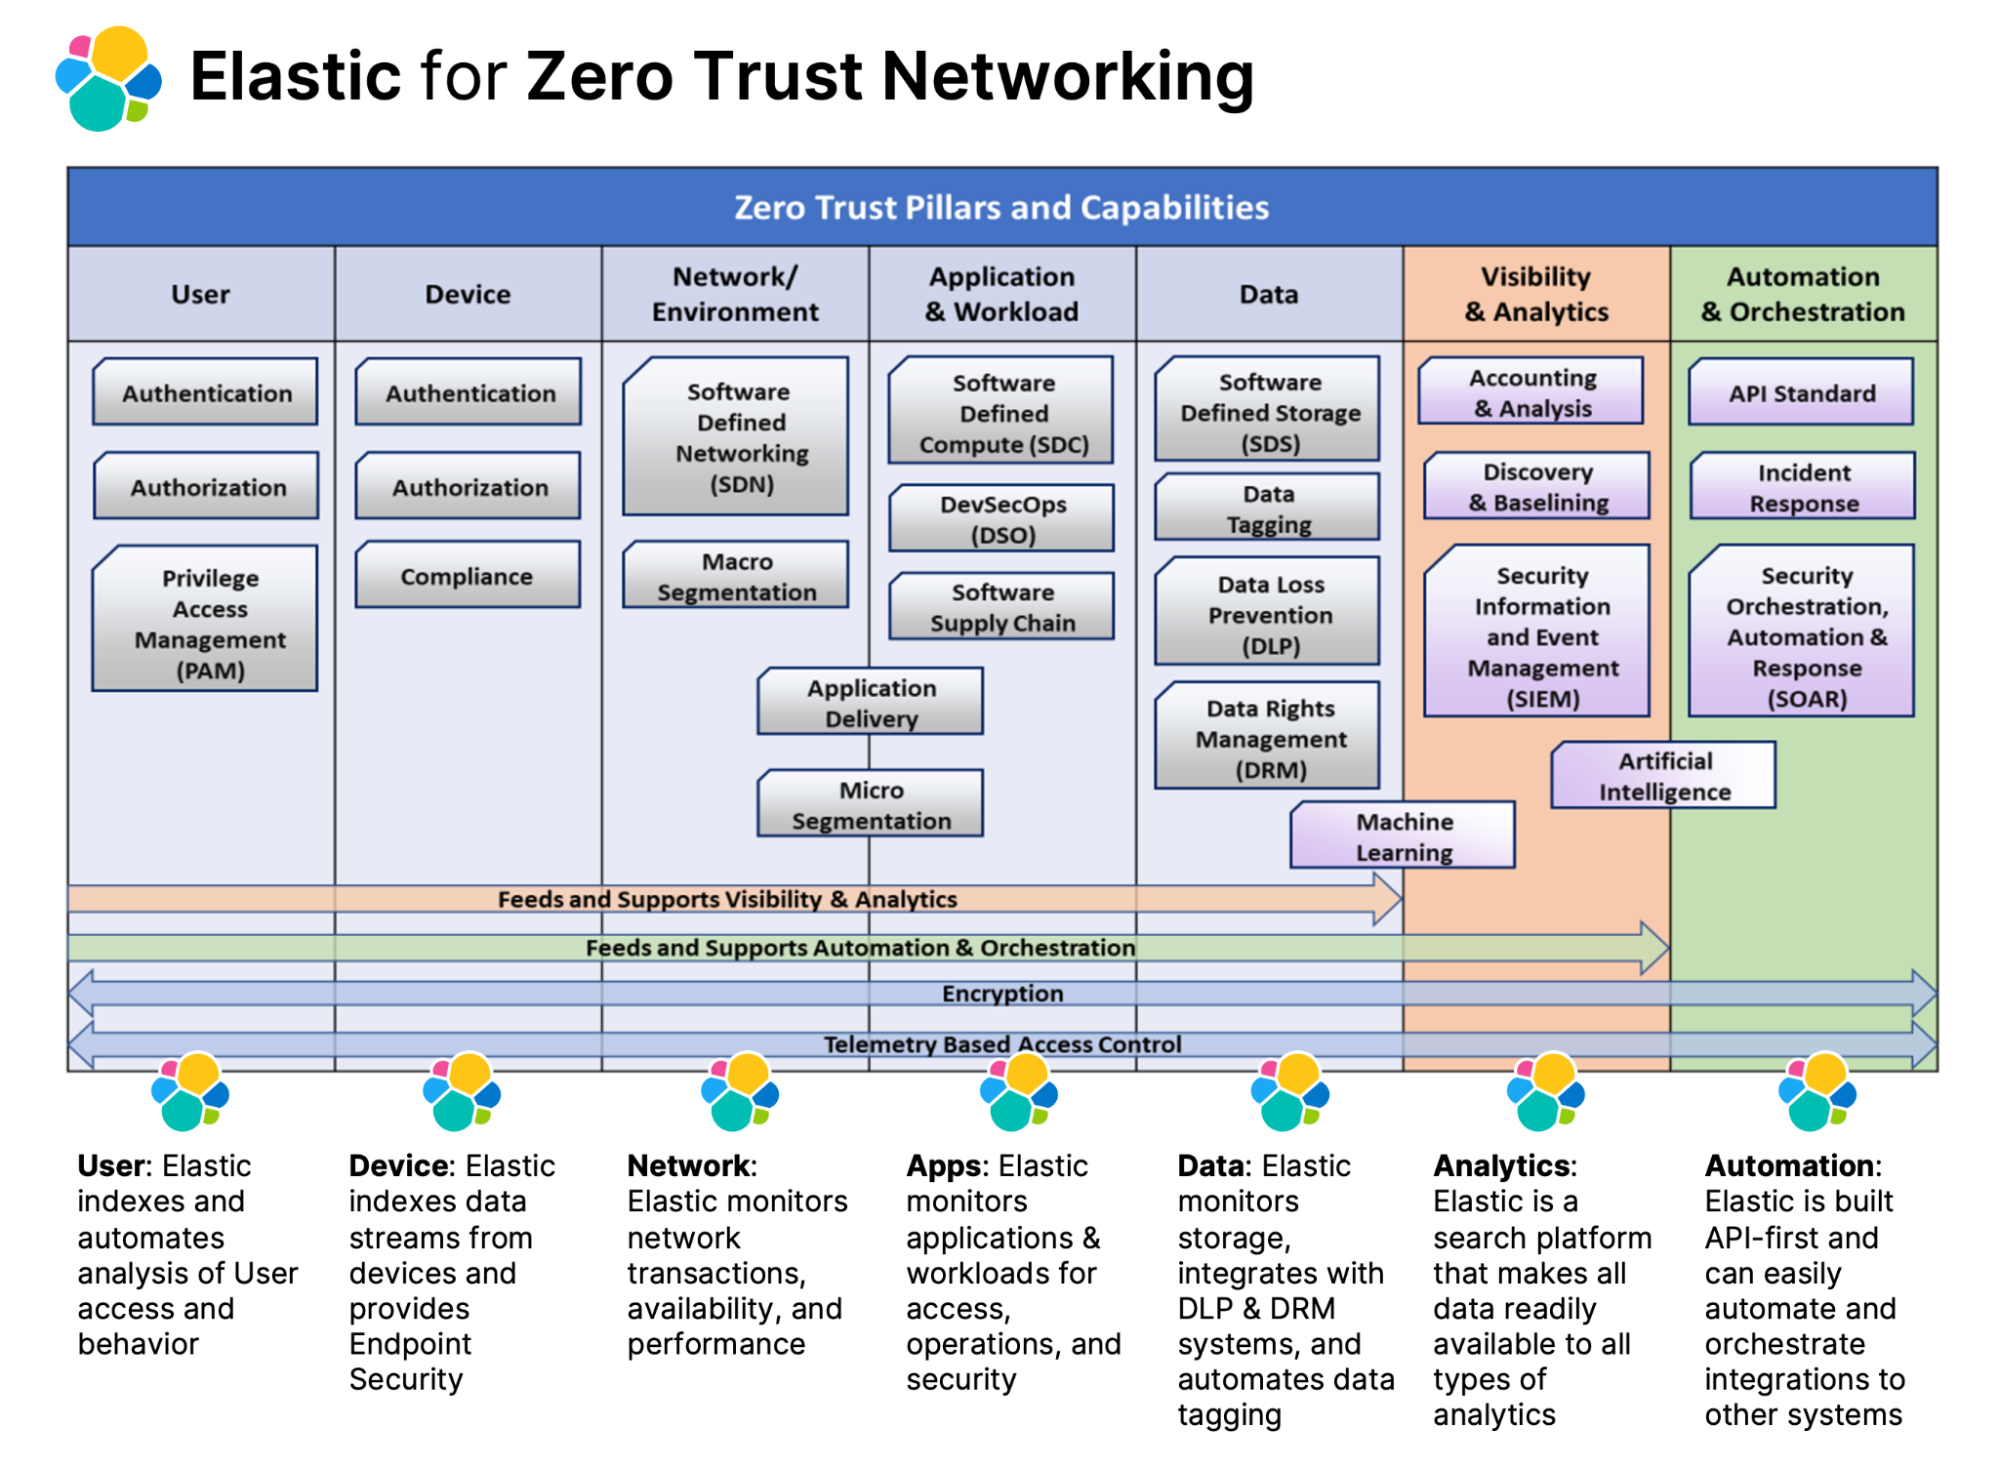 Diagram of zero trust pillars and capabilities across User, Device, Network, Application, Data, Analytics, and Automation.